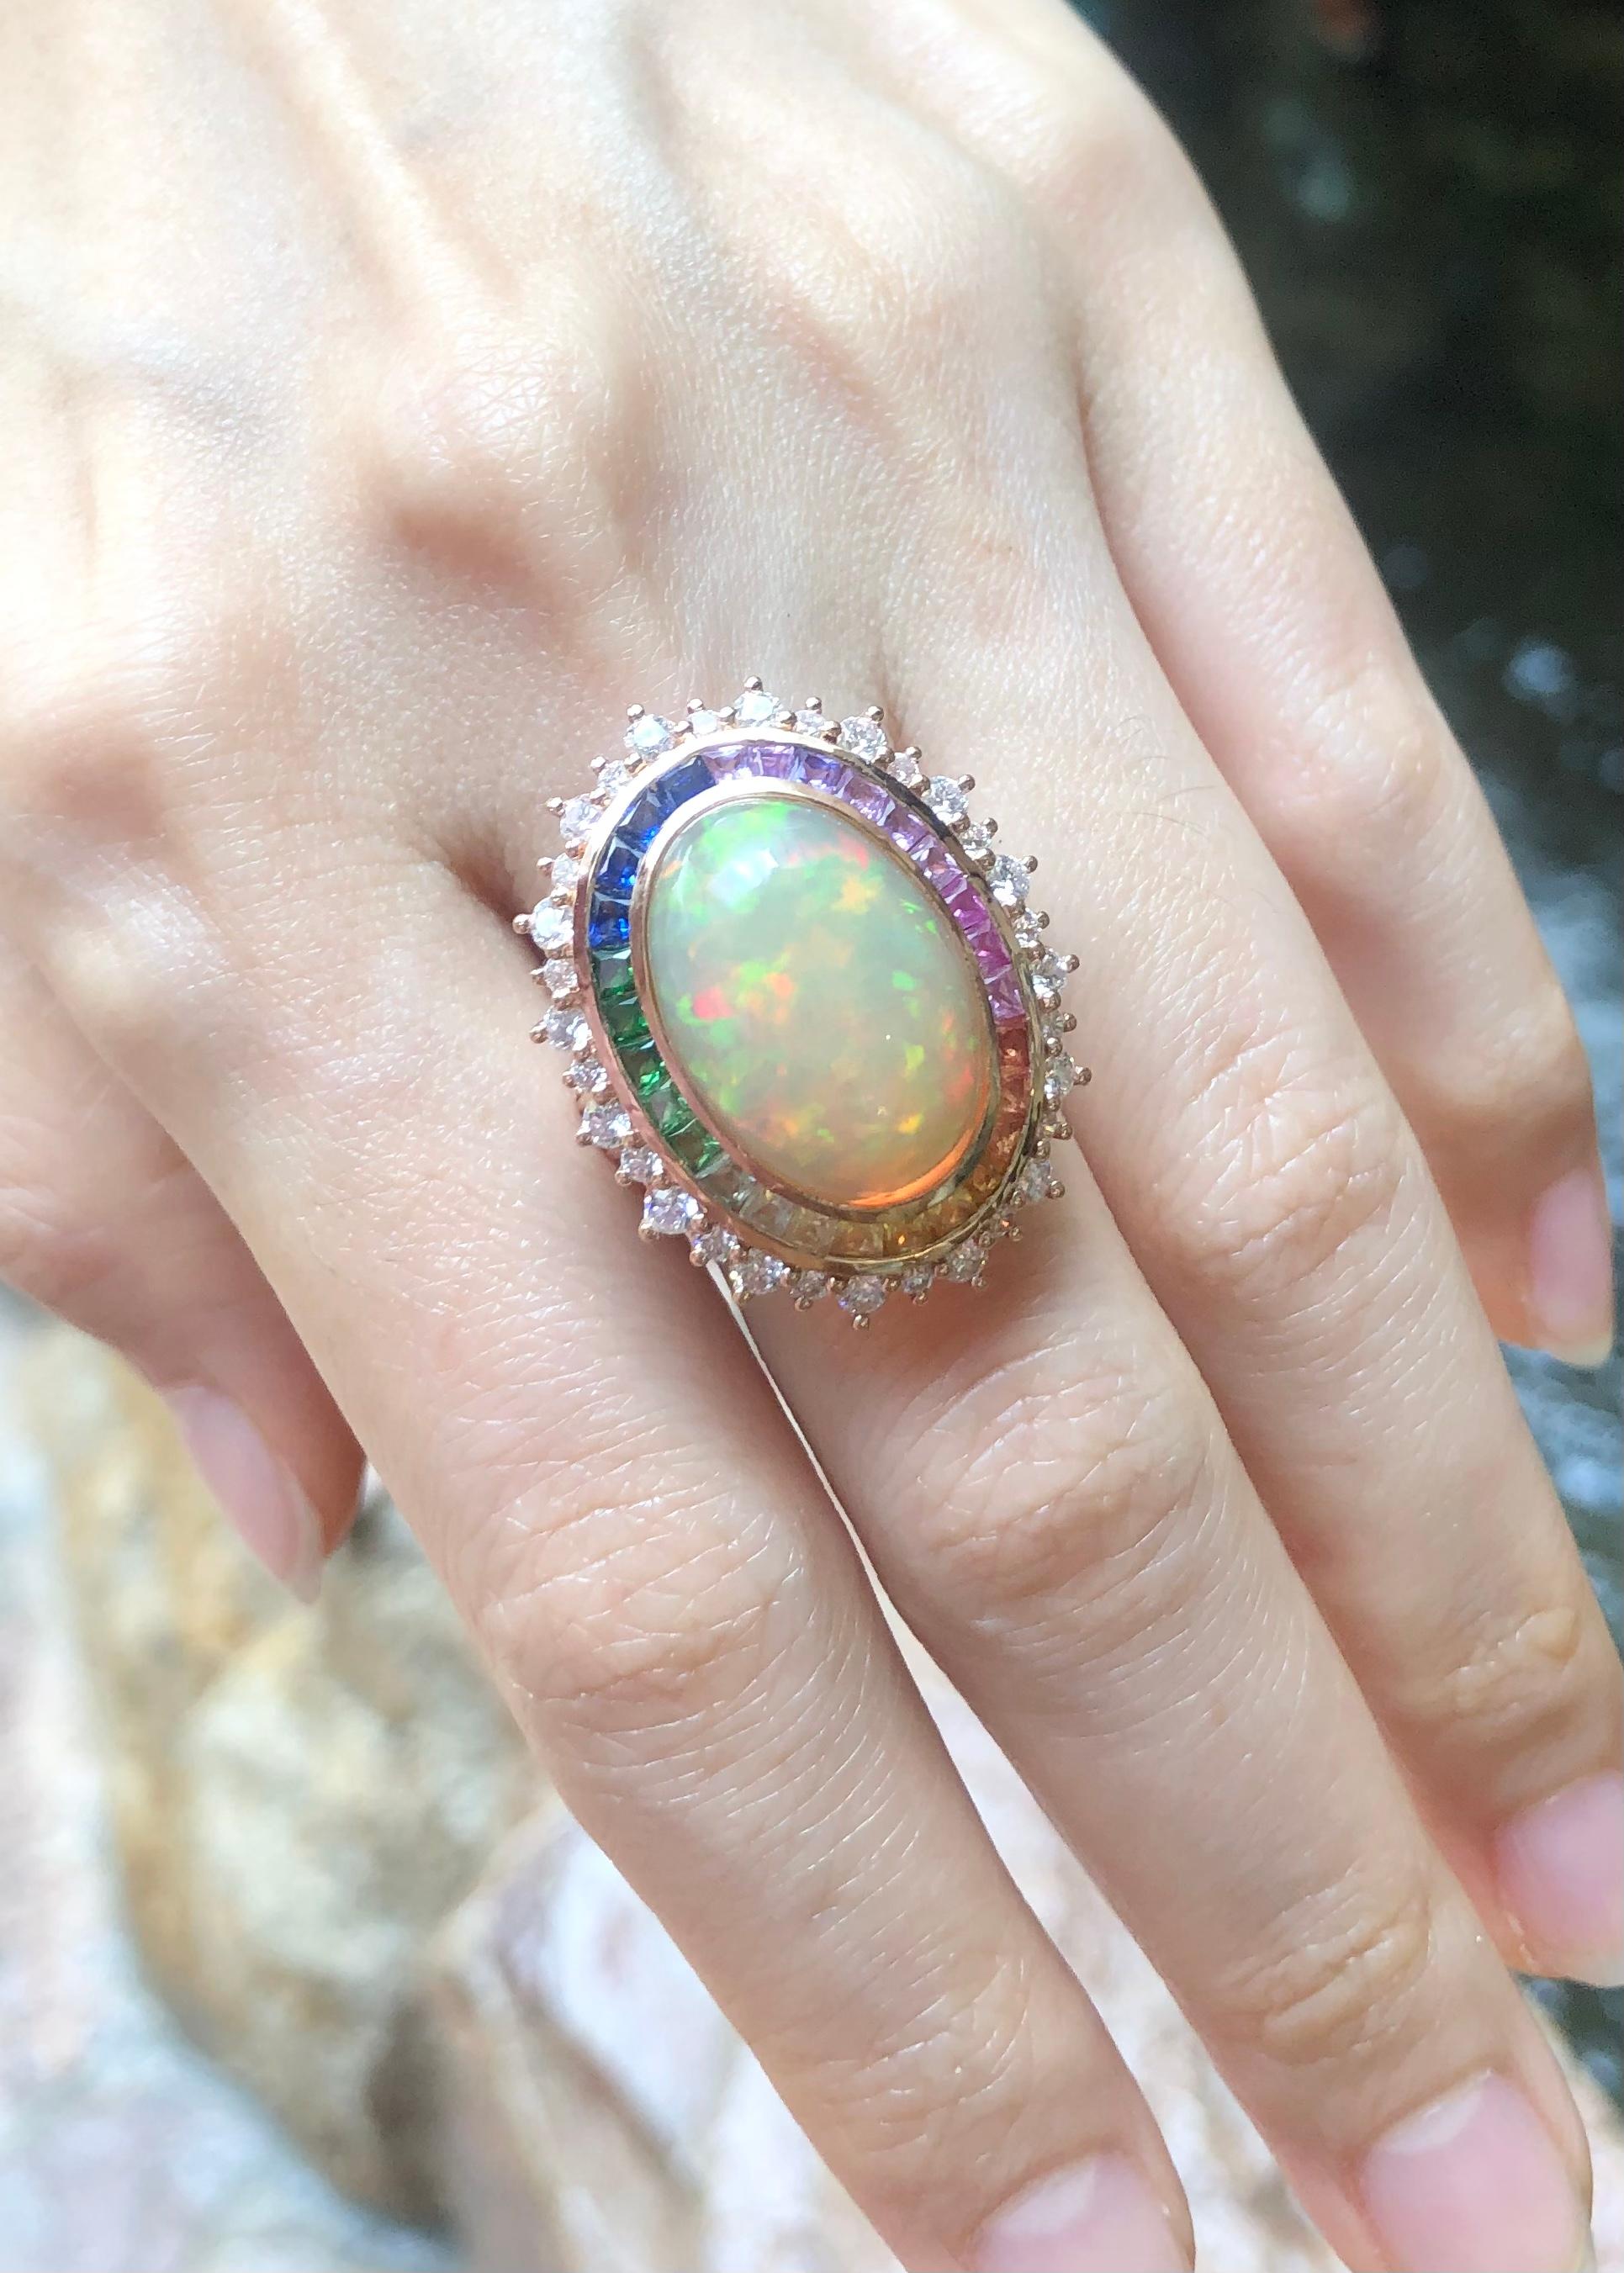 Opal 6.72 carats, Rainbow Coloured Sapphire 2.36 carats and Diamond 1.56 carats Ring set in 18K Rose Gold Settings

Width:  2.1 cm 
Length: 3.8 cm
Ring Size: 53
Total Weight: 12.44 grams

